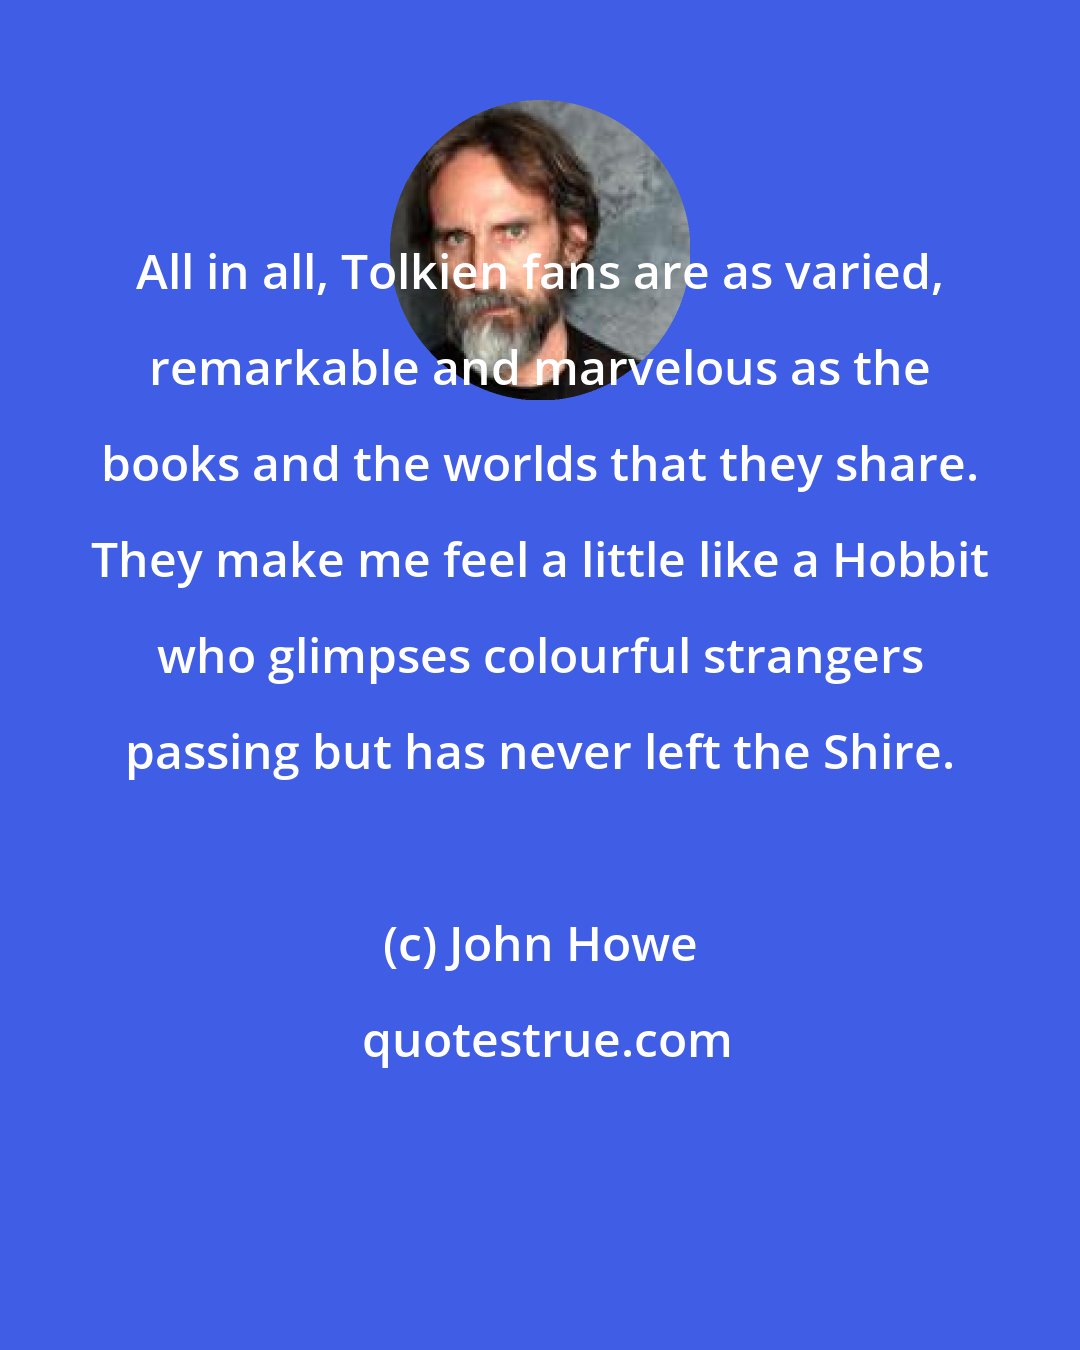 John Howe: All in all, Tolkien fans are as varied, remarkable and marvelous as the books and the worlds that they share. They make me feel a little like a Hobbit who glimpses colourful strangers passing but has never left the Shire.